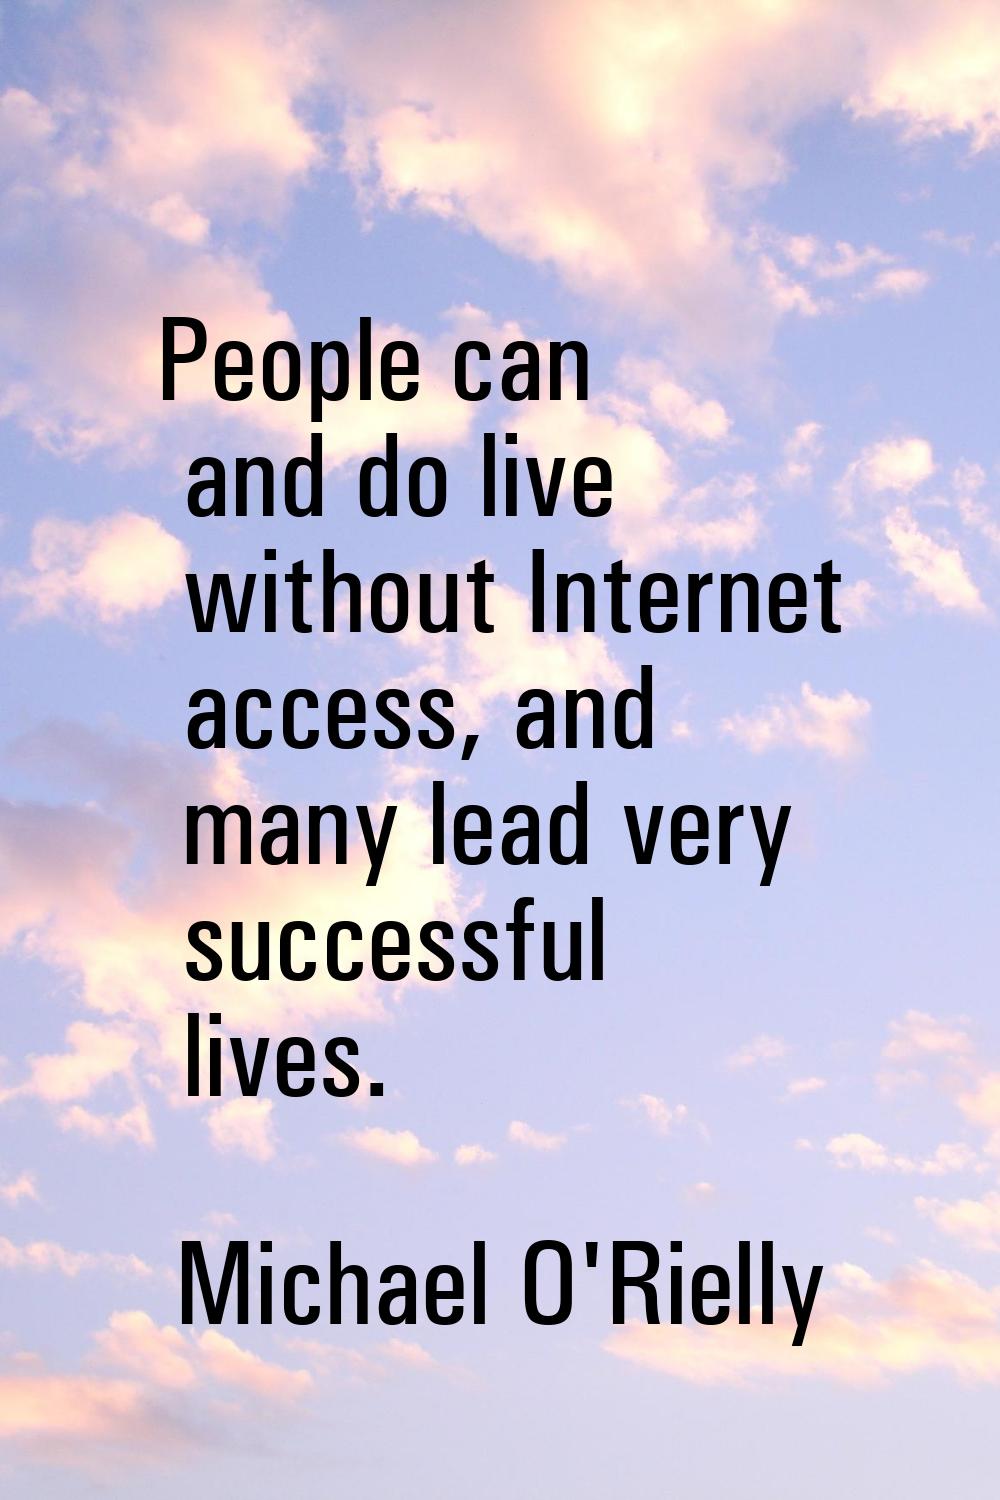 People can and do live without Internet access, and many lead very successful lives.